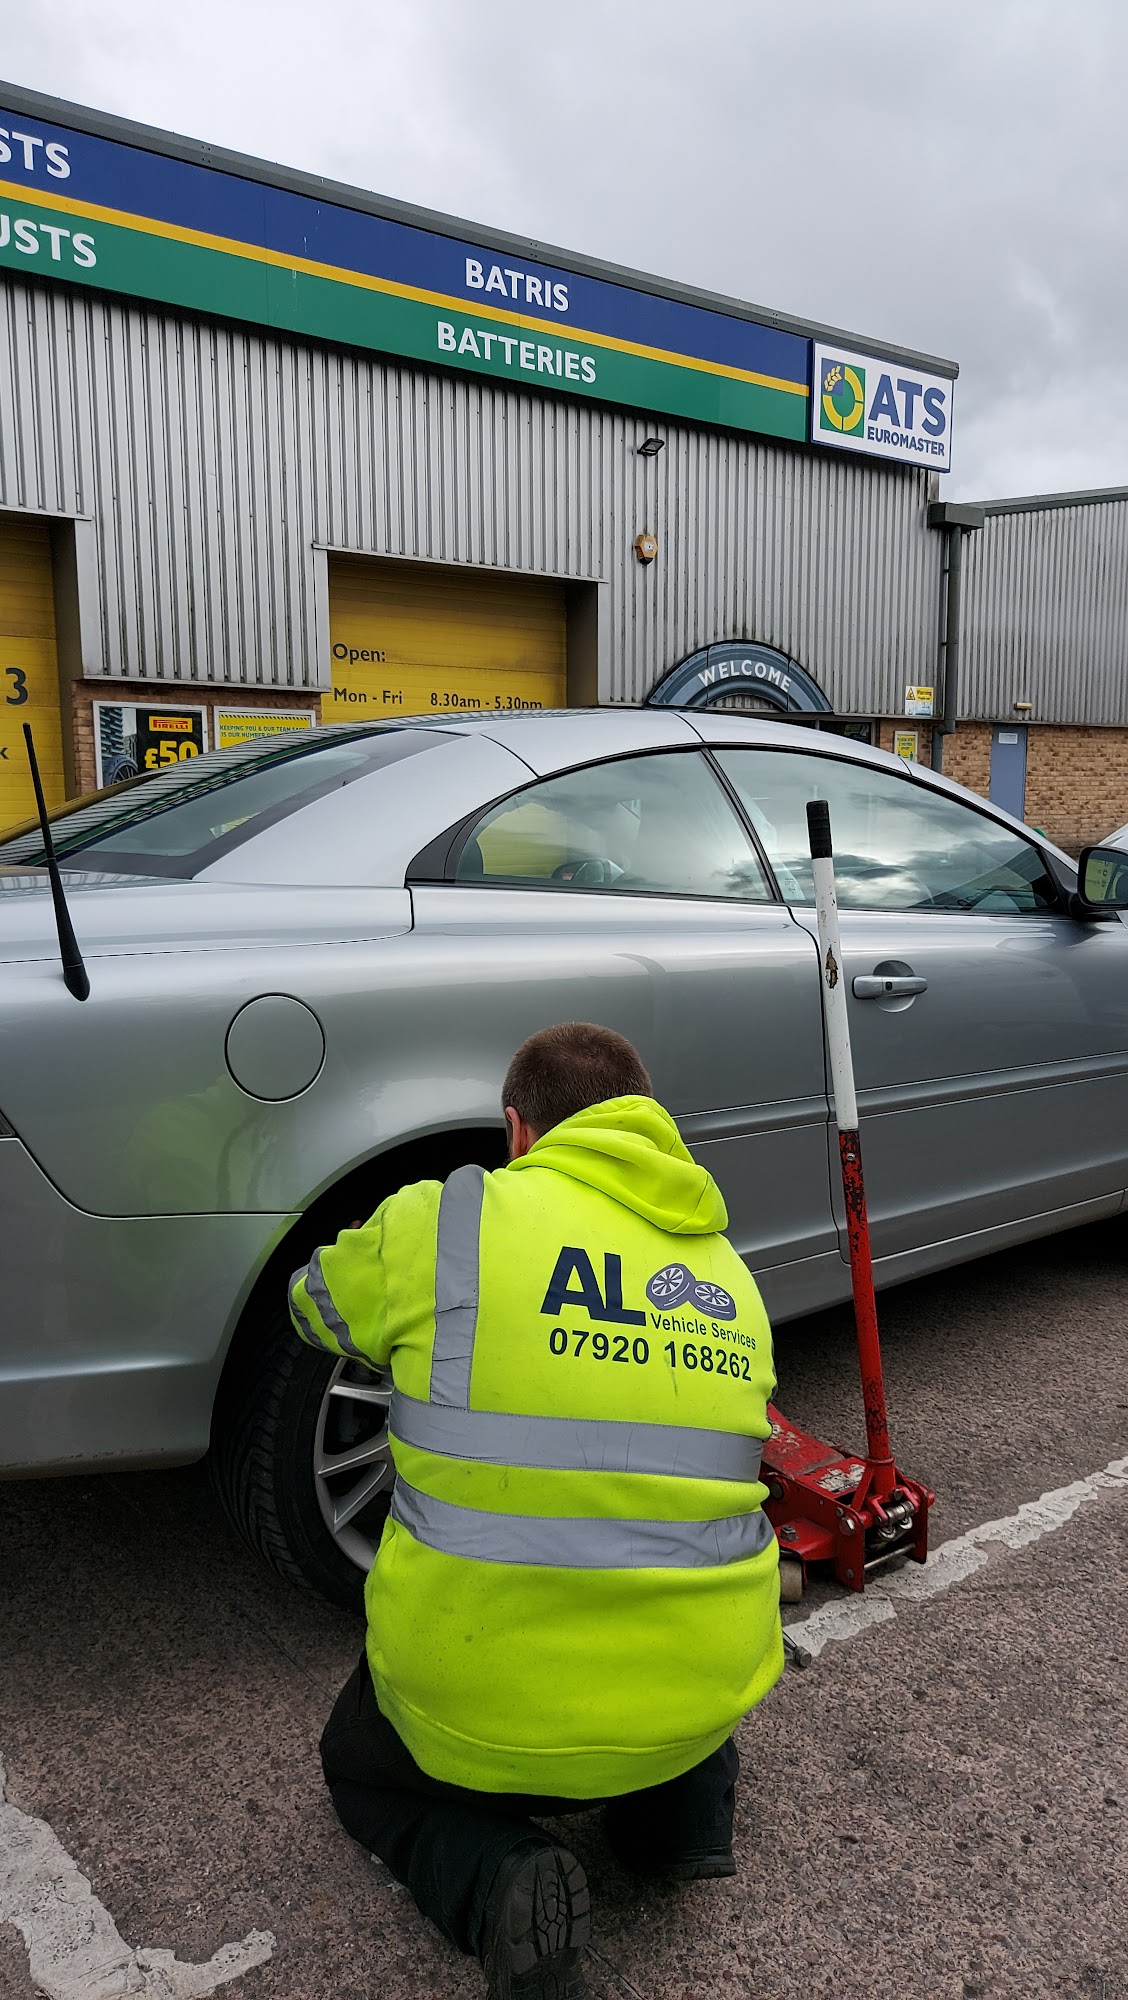 Mobile Tyres And Puncture Repairs Cardiff - AL Tyre Services